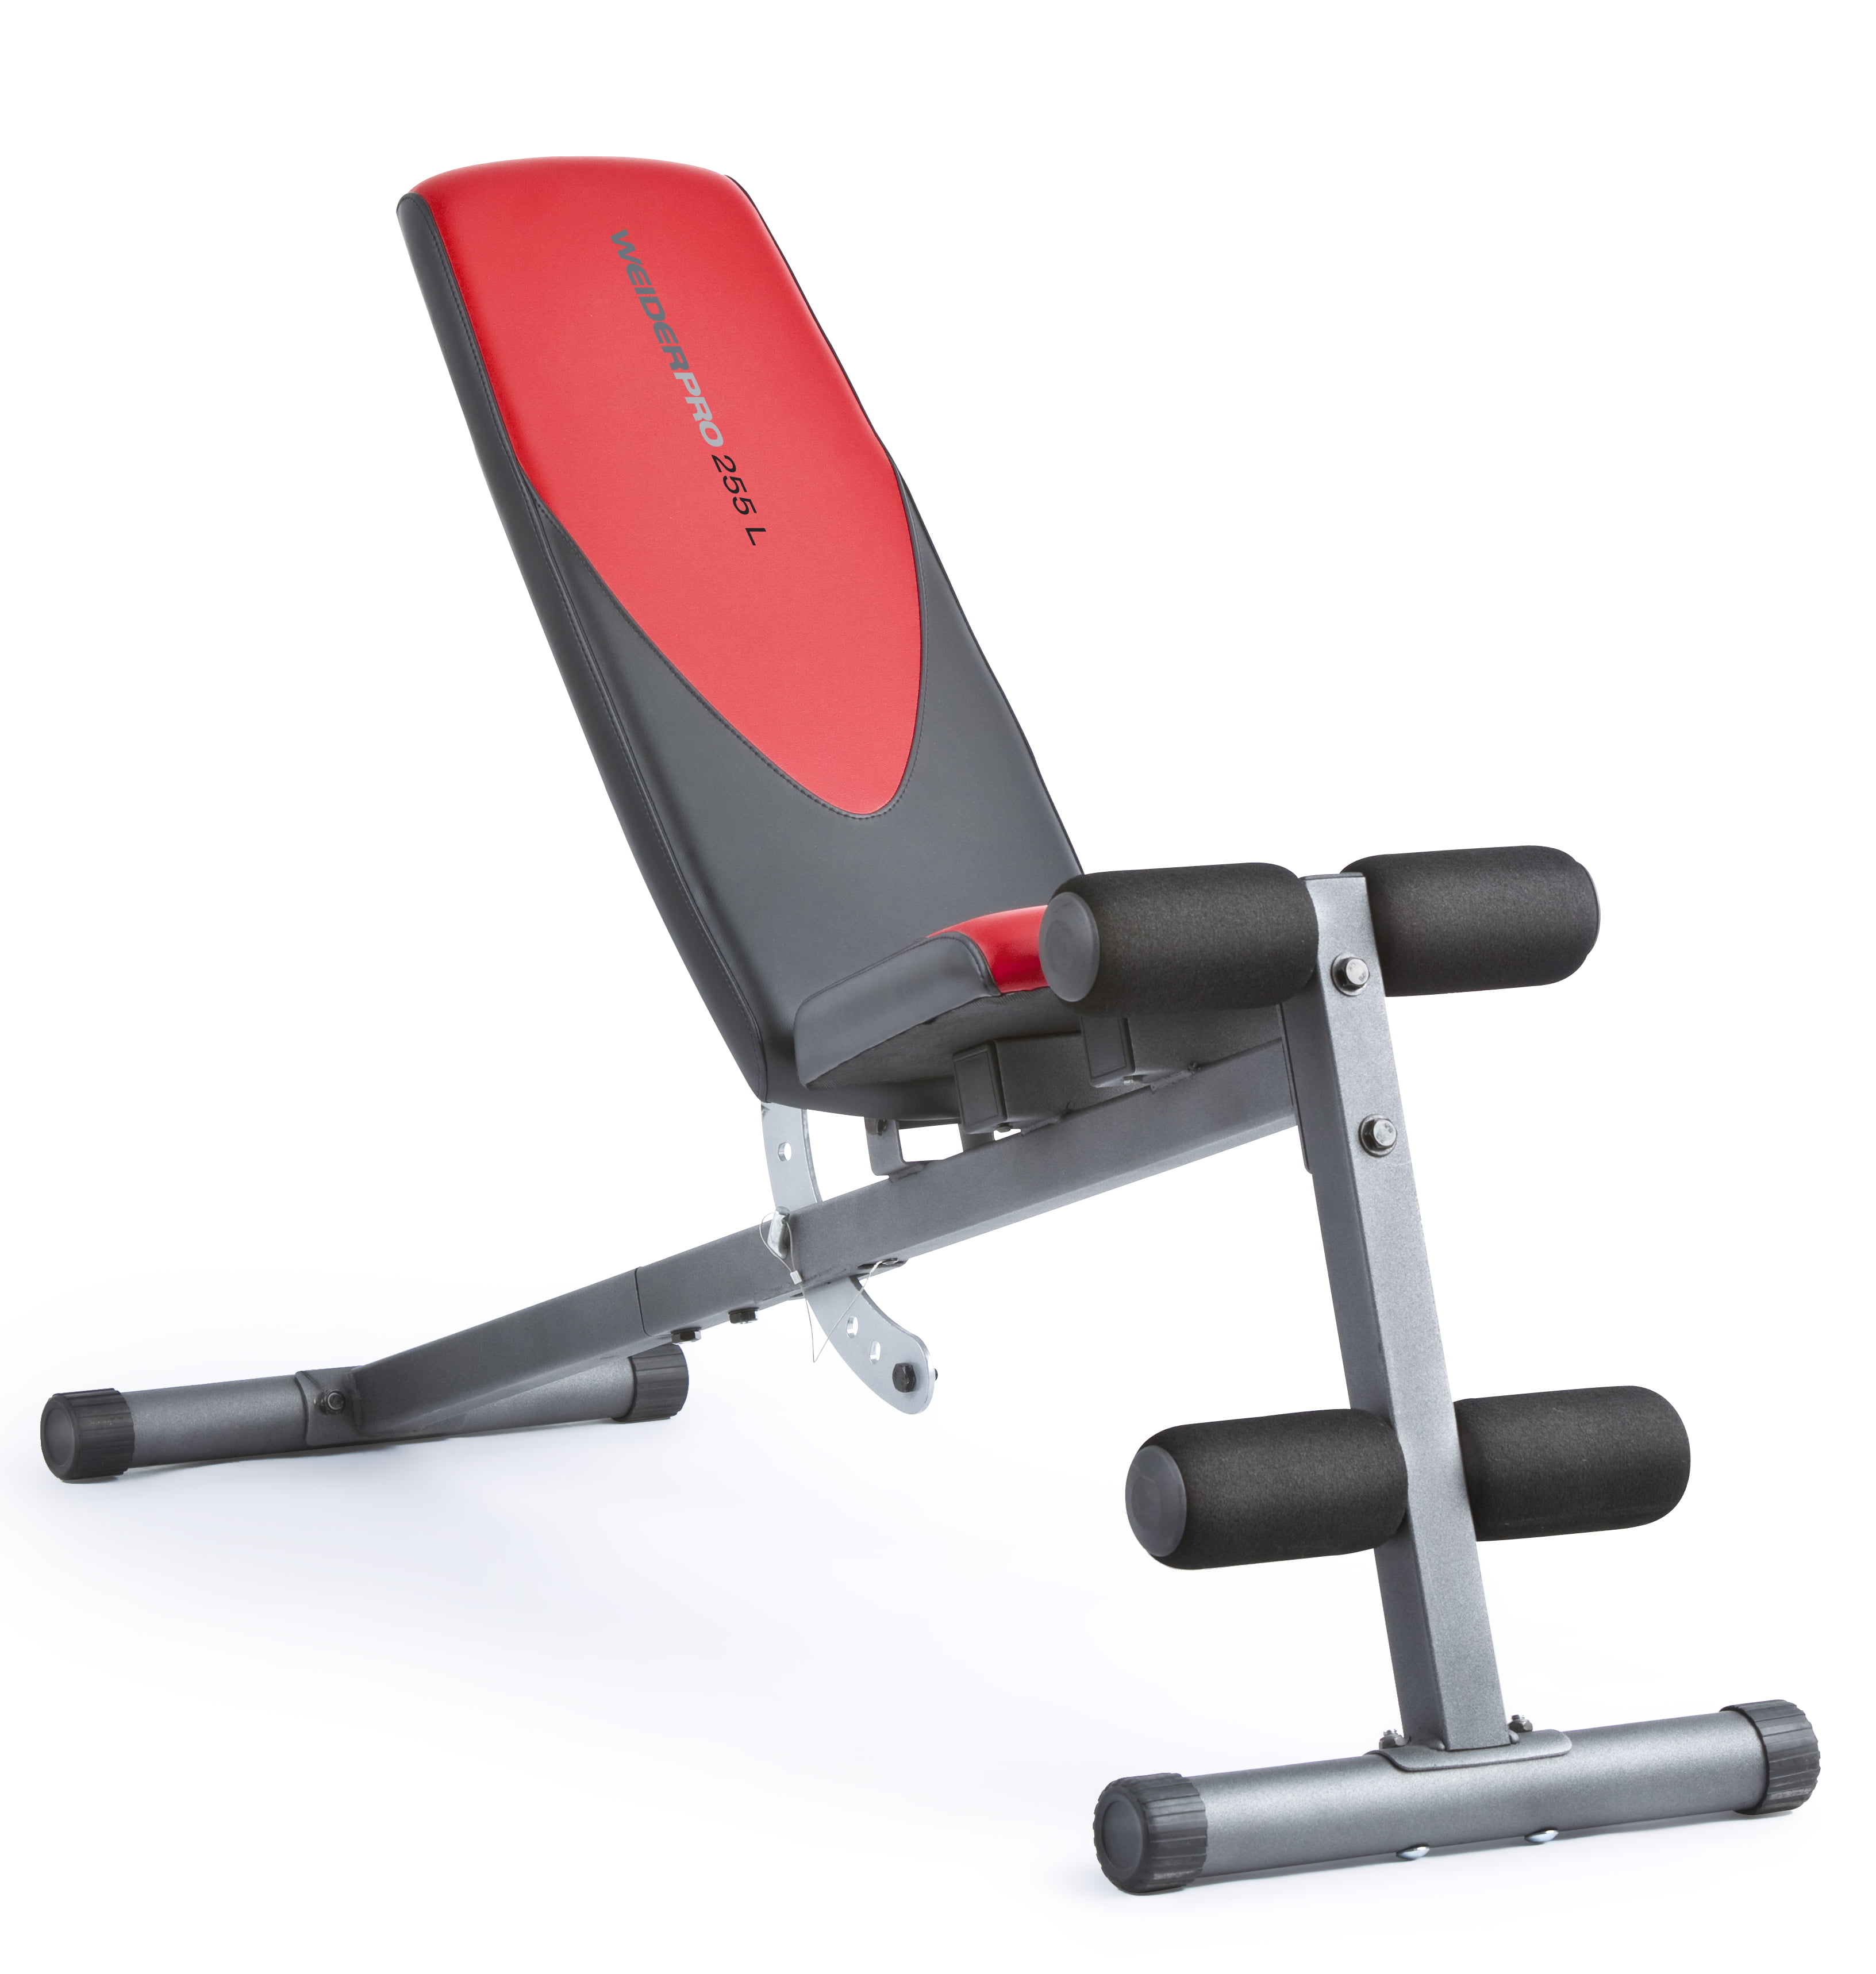 weider-pro-225-l-bench-with-exercise-chart-walmart